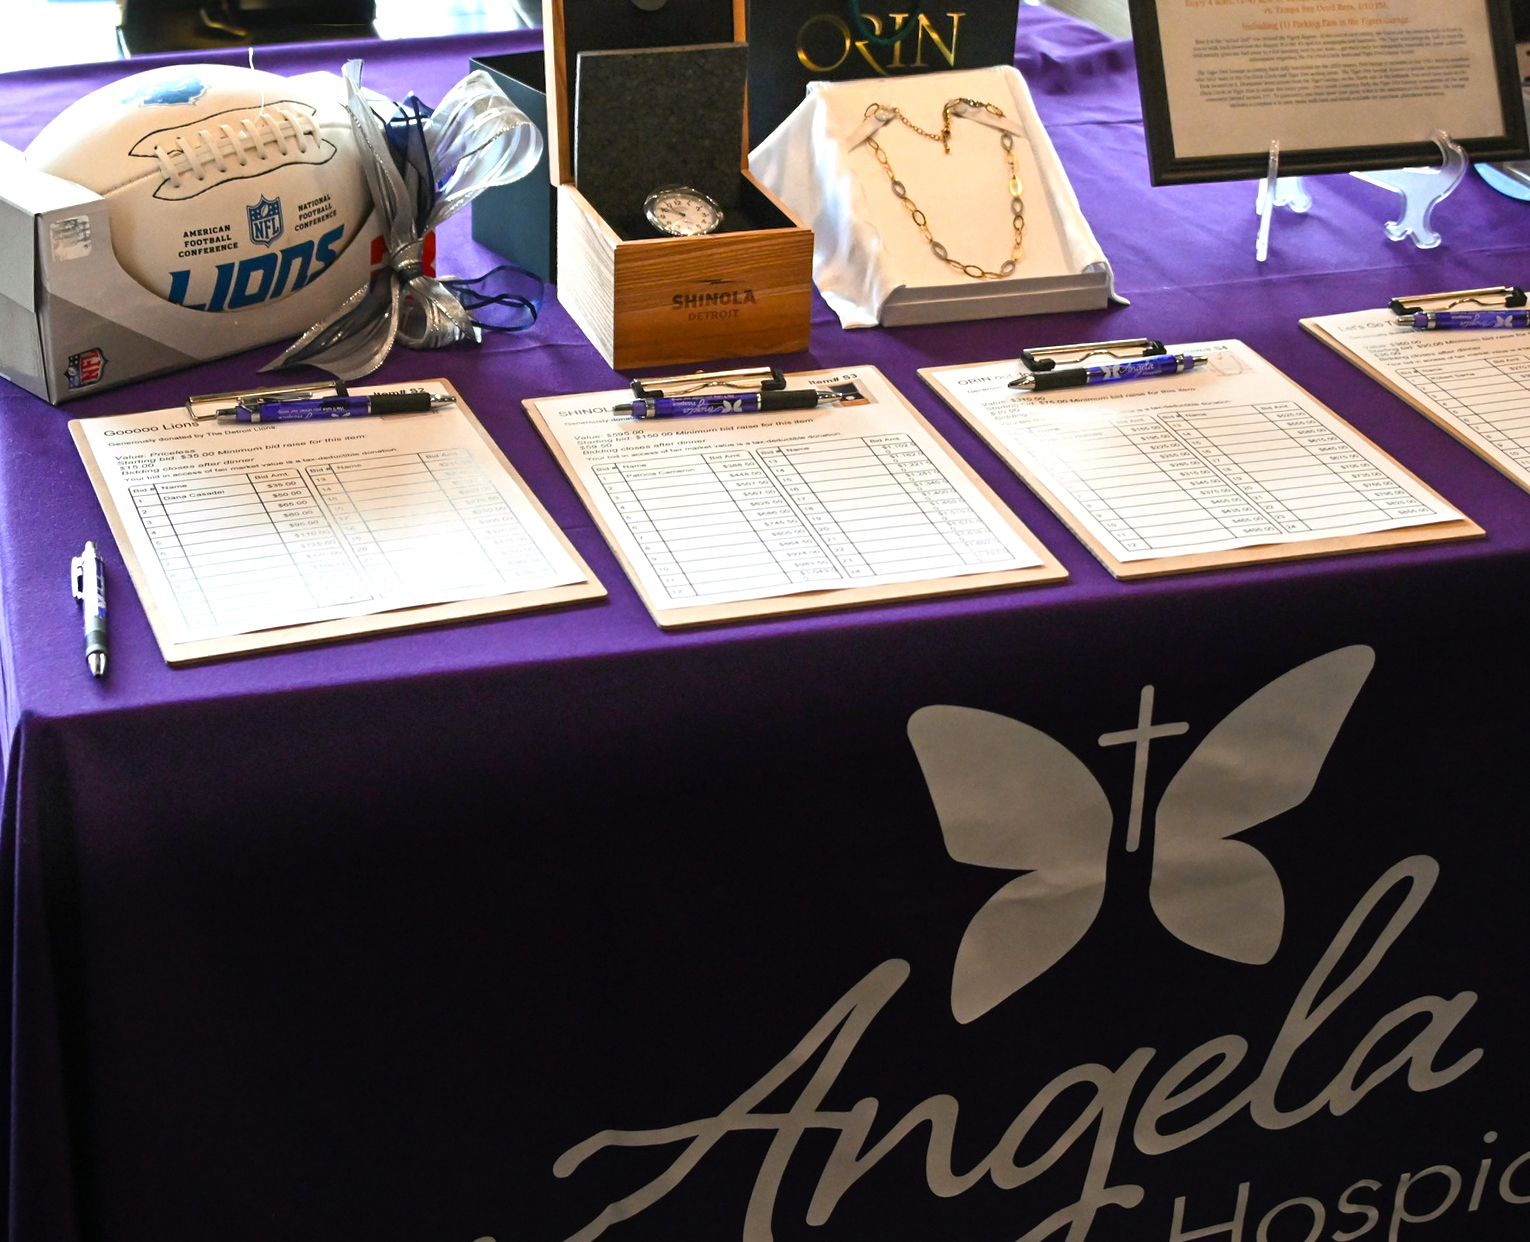 Auction featuring an autographed football, shinola watch, and gold necklace